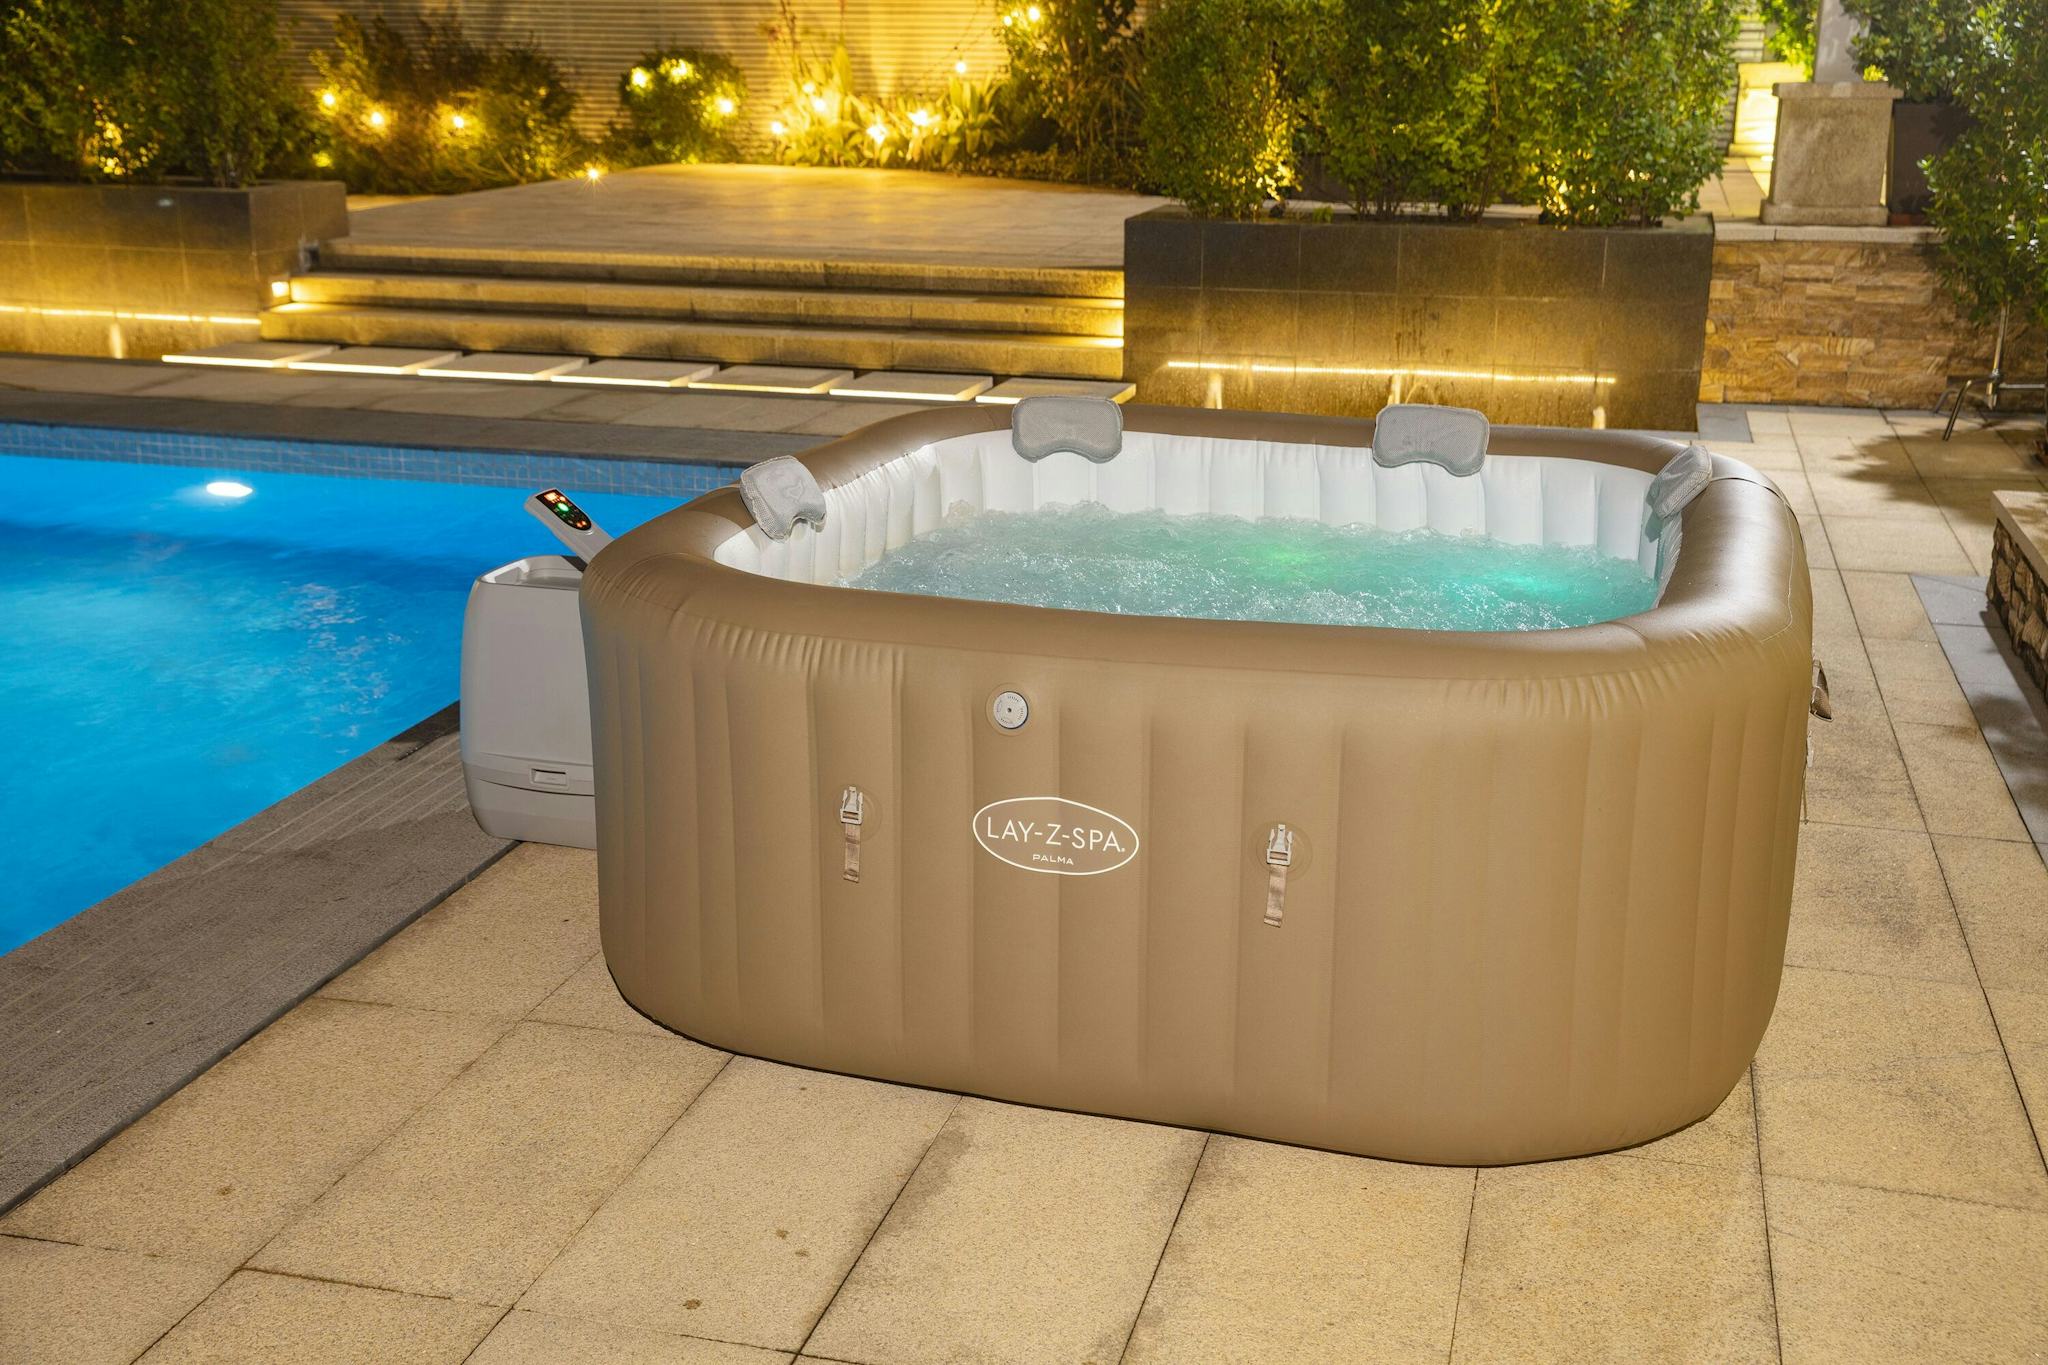 Spas Gonflables Spa gonflable carré Lay-Z-Spa® Palma Hydrojet Pro™ 5 - 7 places Bestway 16